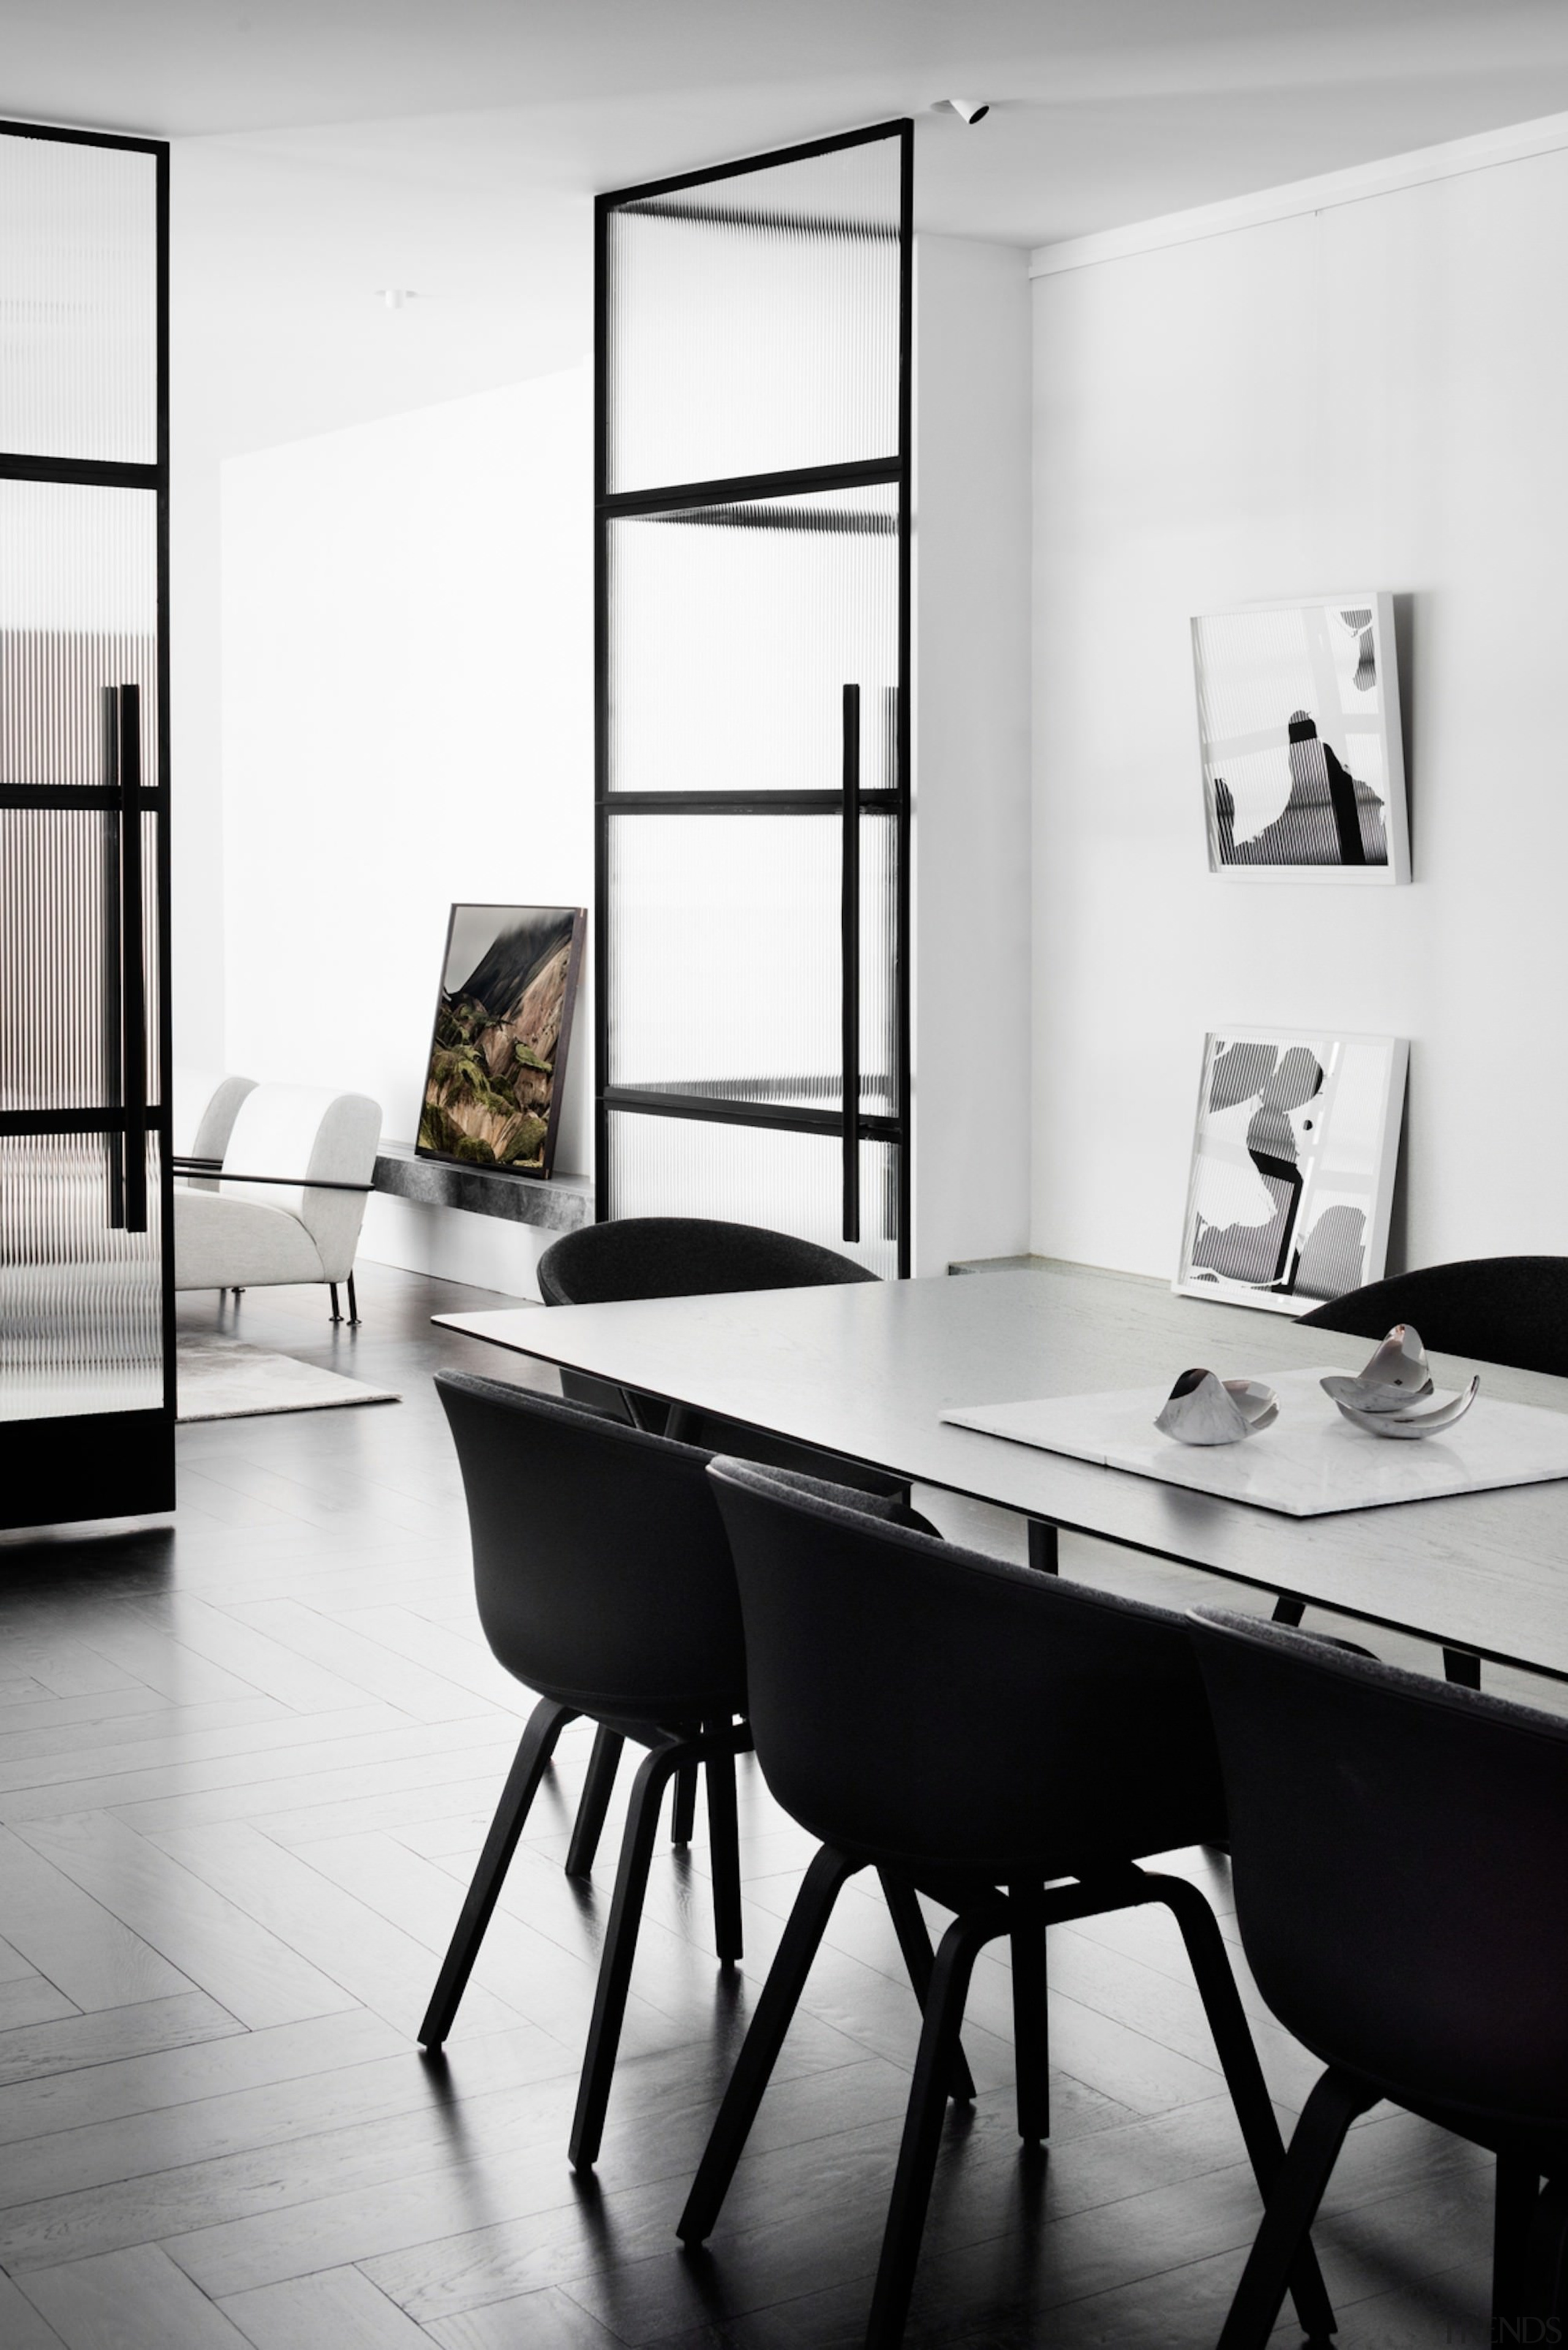 The dining area with angled mirrors - The black and white, chair, furniture, interior design, product design, shelf, shelving, table, white